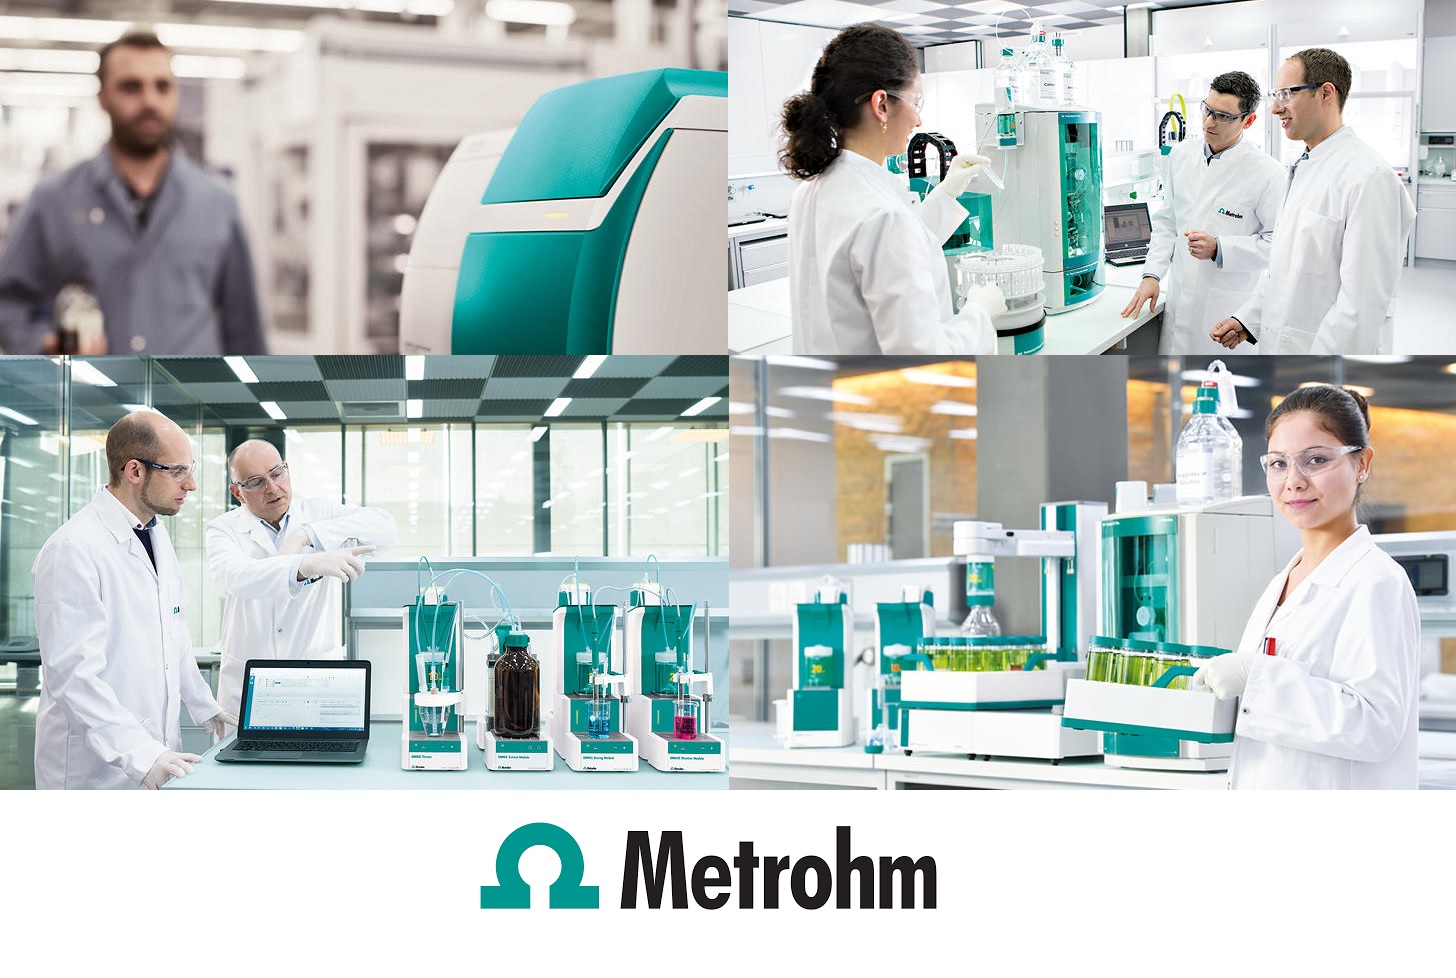 Metrohm: Tips and tricks to analyze difficult samples using the Karl Fischer oven technique